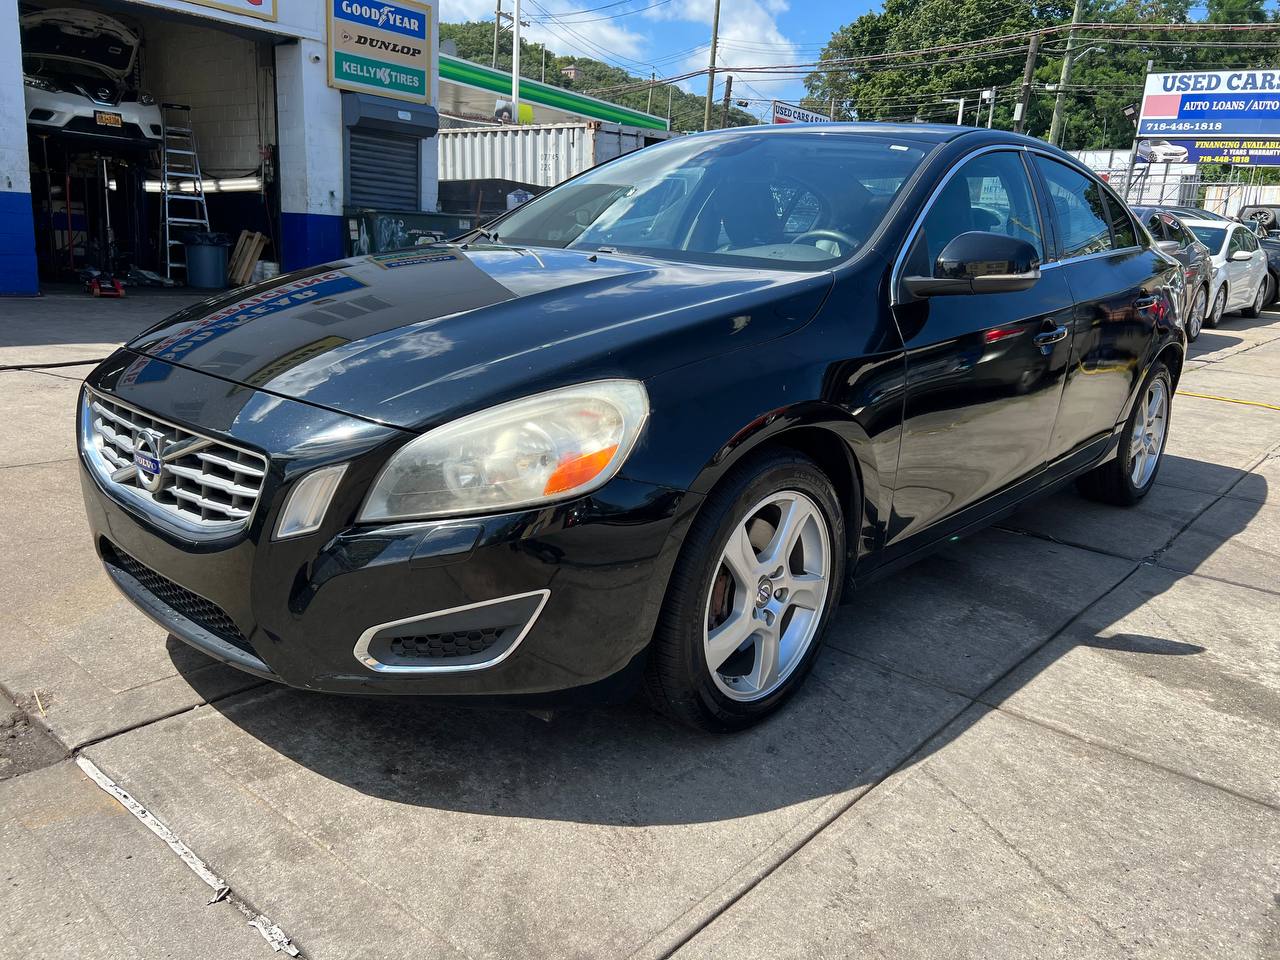 Used Car - 2013 Volvo S60 T5 for Sale in Staten Island, NY